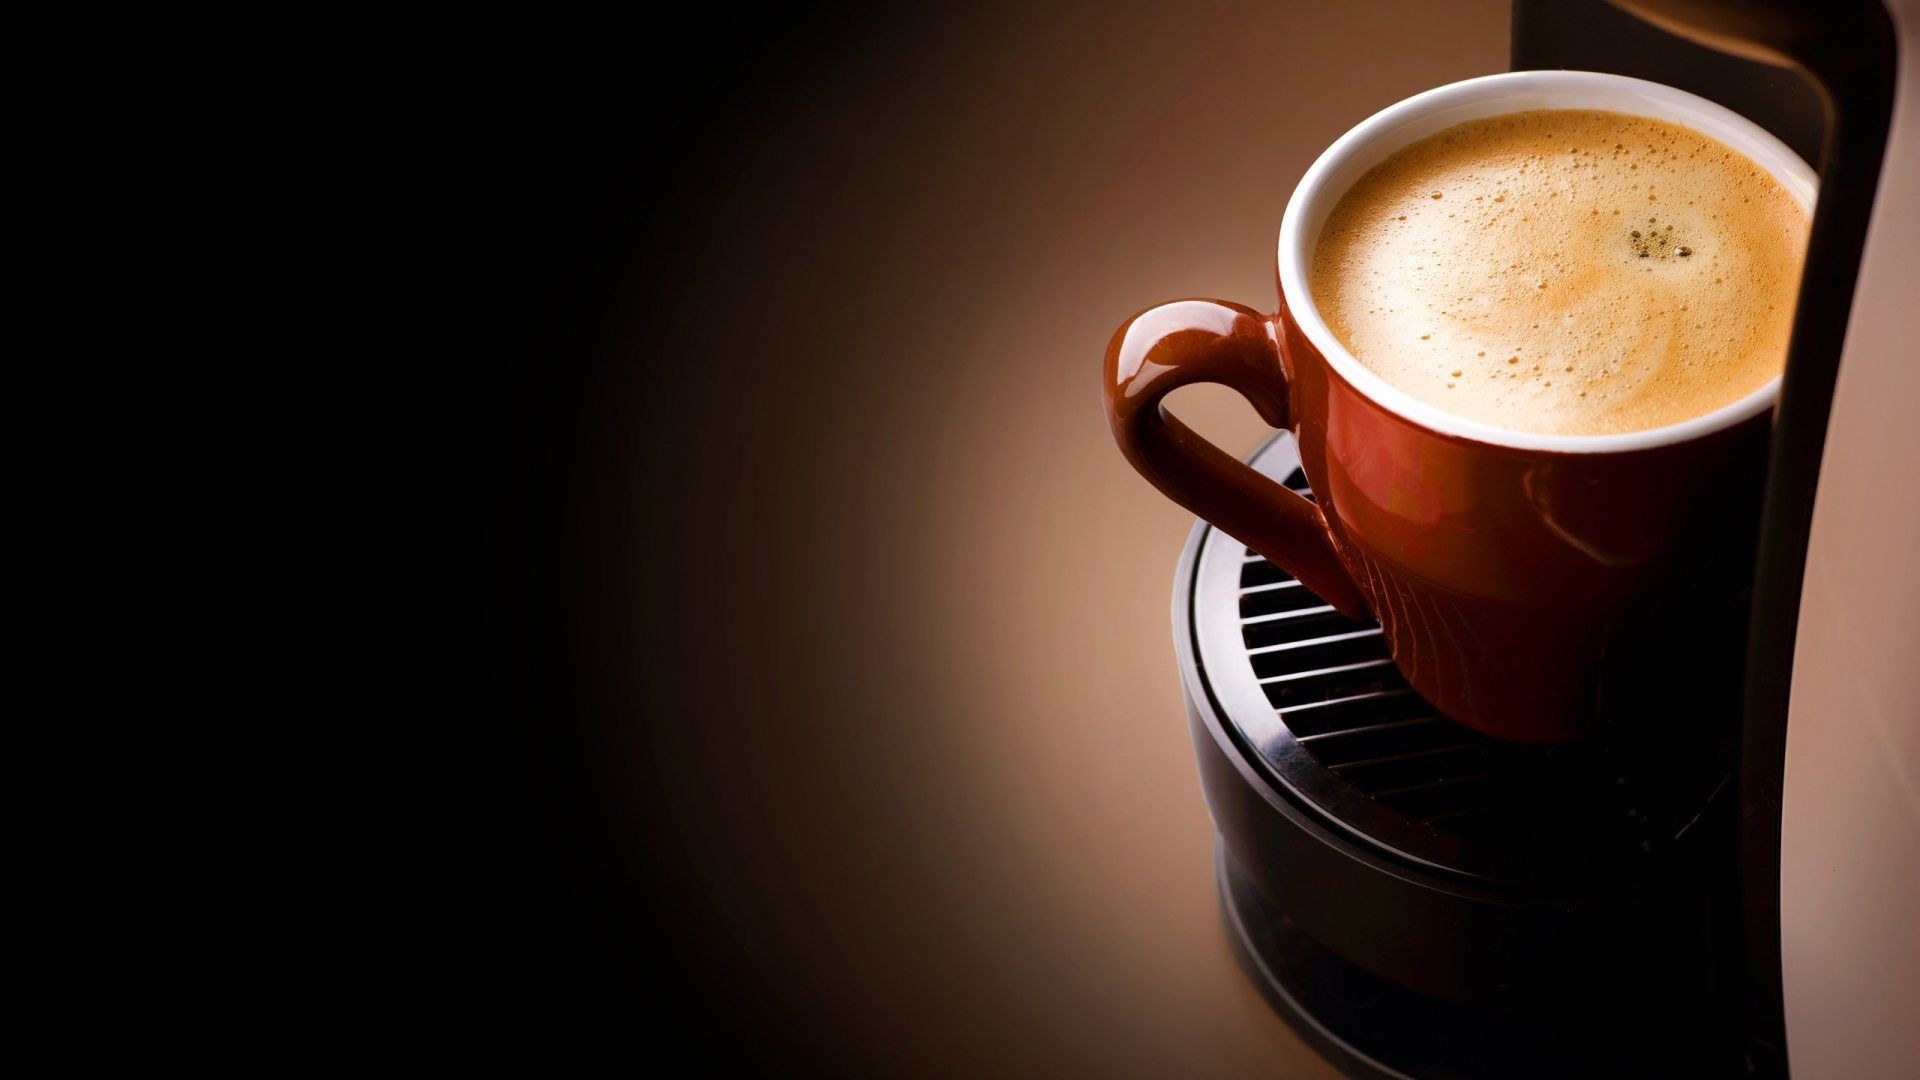 New cool coffee Wallpaper coffee Wallpaper Download New